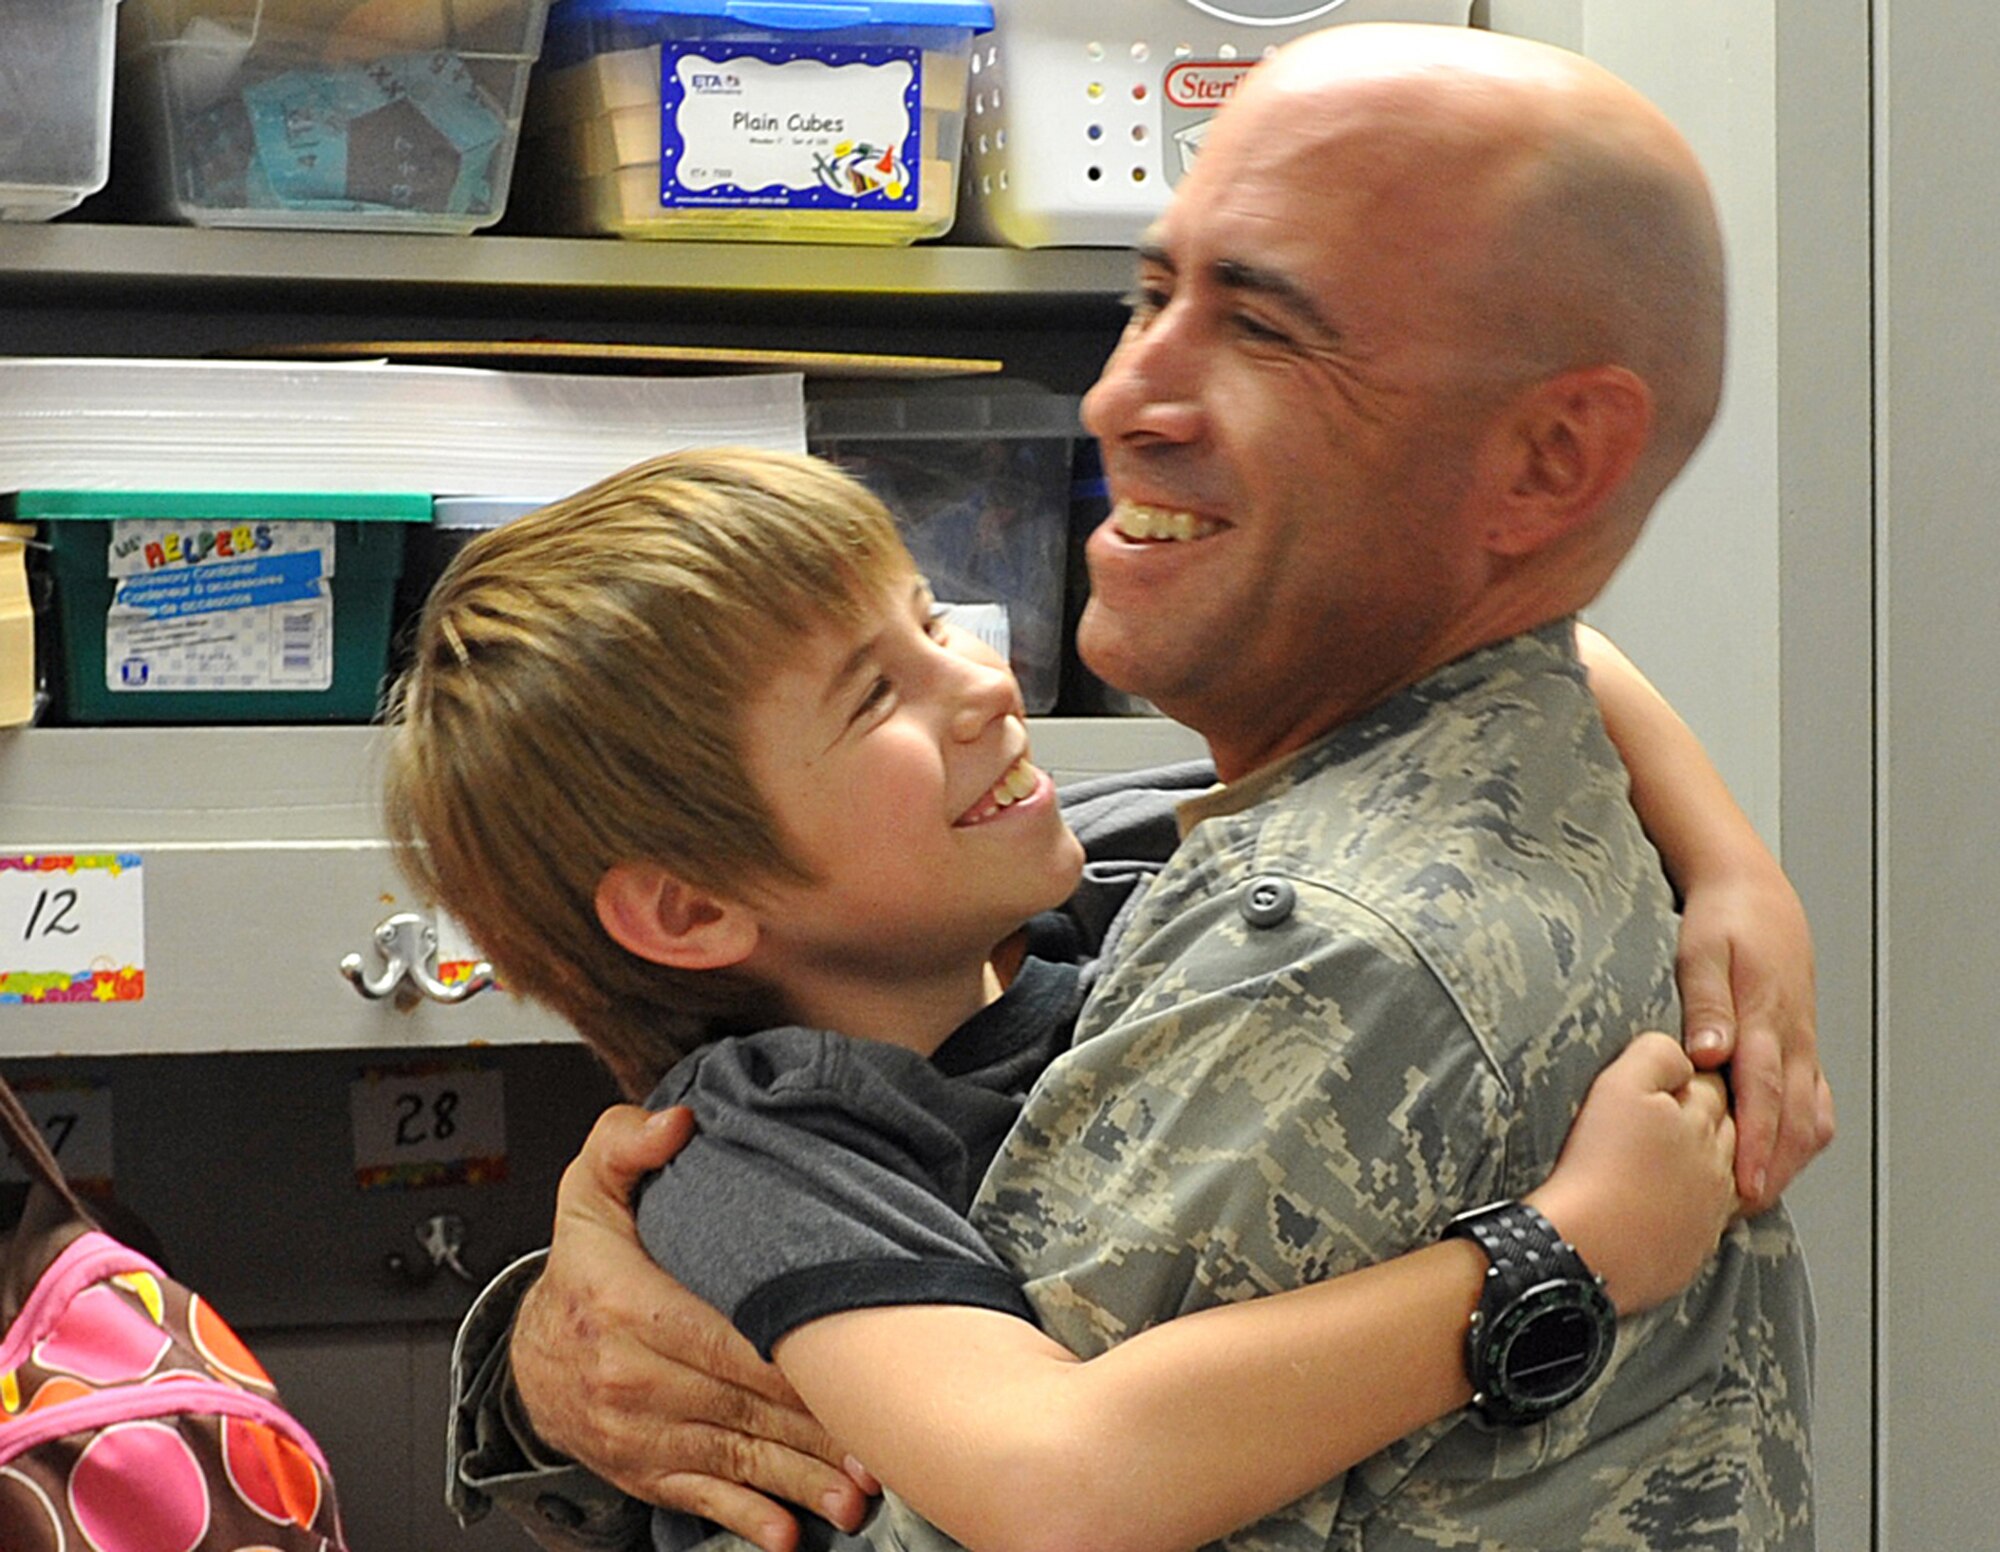 James wraps his arms around his dad, Capt. Nathan List, during a surprise welcome home Dec. 9 at Shirley Hills Elementary School in Warner Robins, Ga.  Captain List ended his six-month deployment to Al Asad Air Base, Iraq, three weeks early, and with the help of the school staffs was able to surprise his children in their classrooms. “It was a long road home,” said List. “Tuesday (Dec.  6) I was in Iraq and today I’m with my family. It’s a great feeling,” he said.  (U.S. Air Force photo/Tommie Horton)